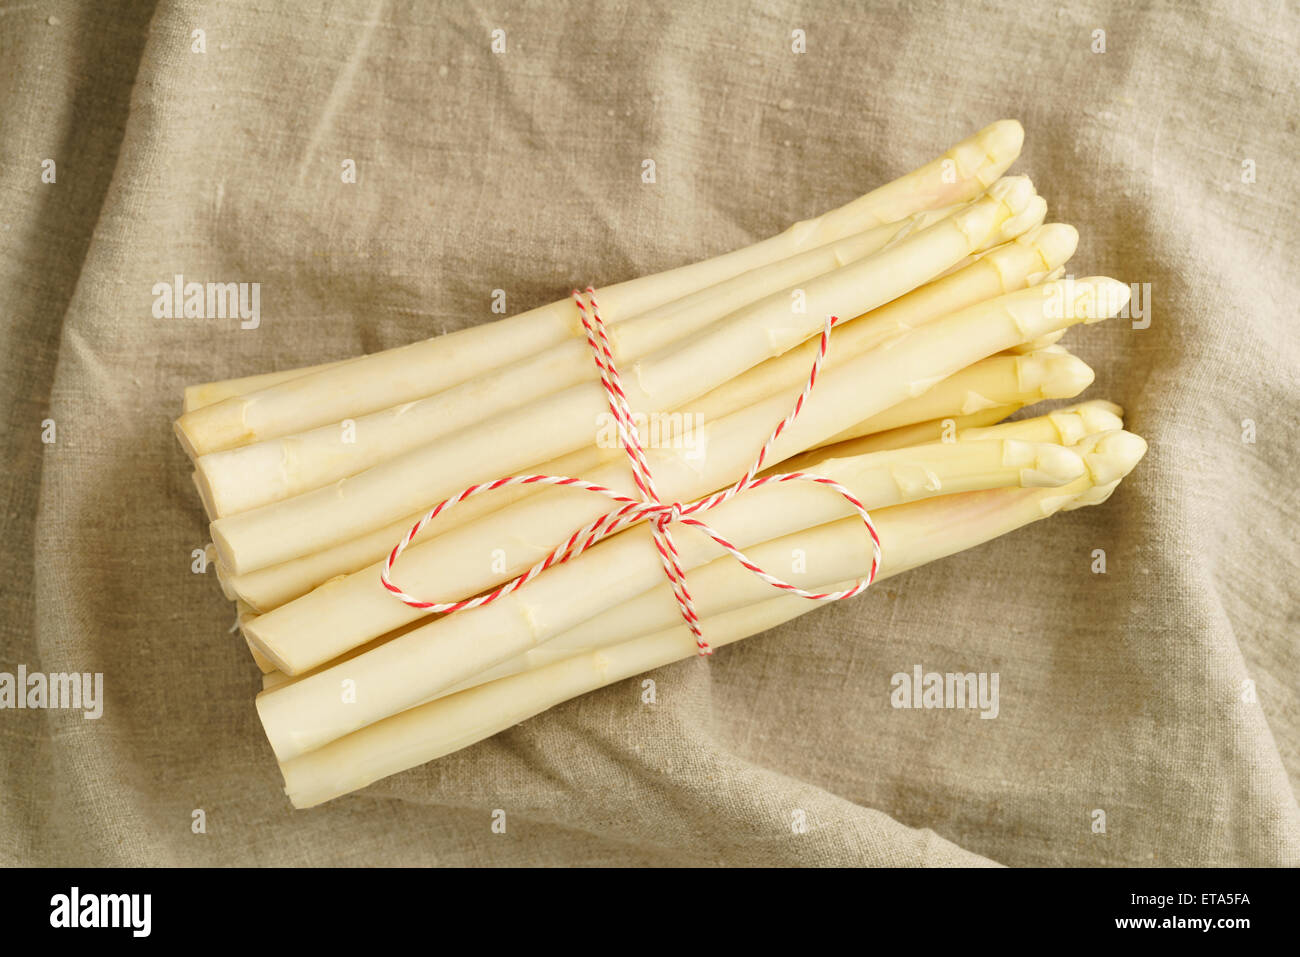 Bunch of fresh white asparagus on wooden table with linen cloth Stock Photo